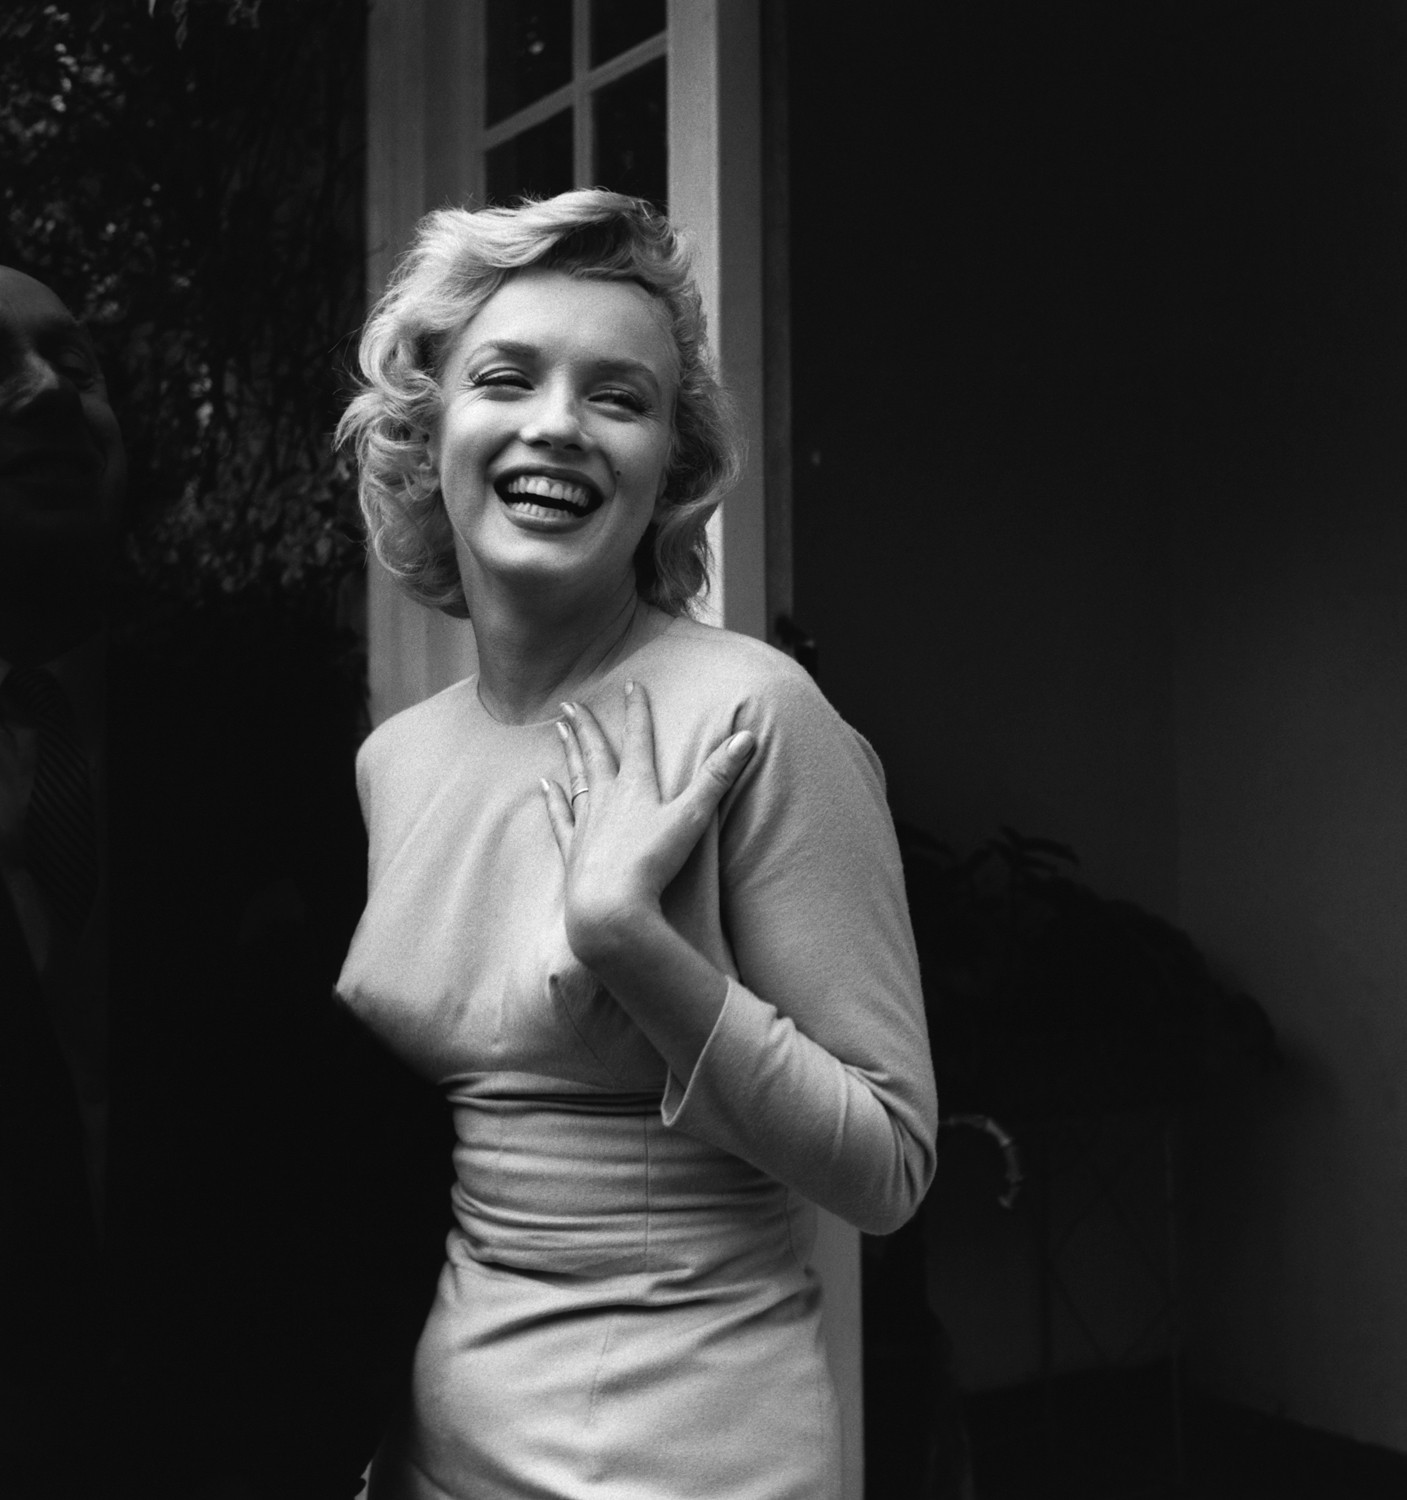 Monroe cracking a wide smile in 1956.